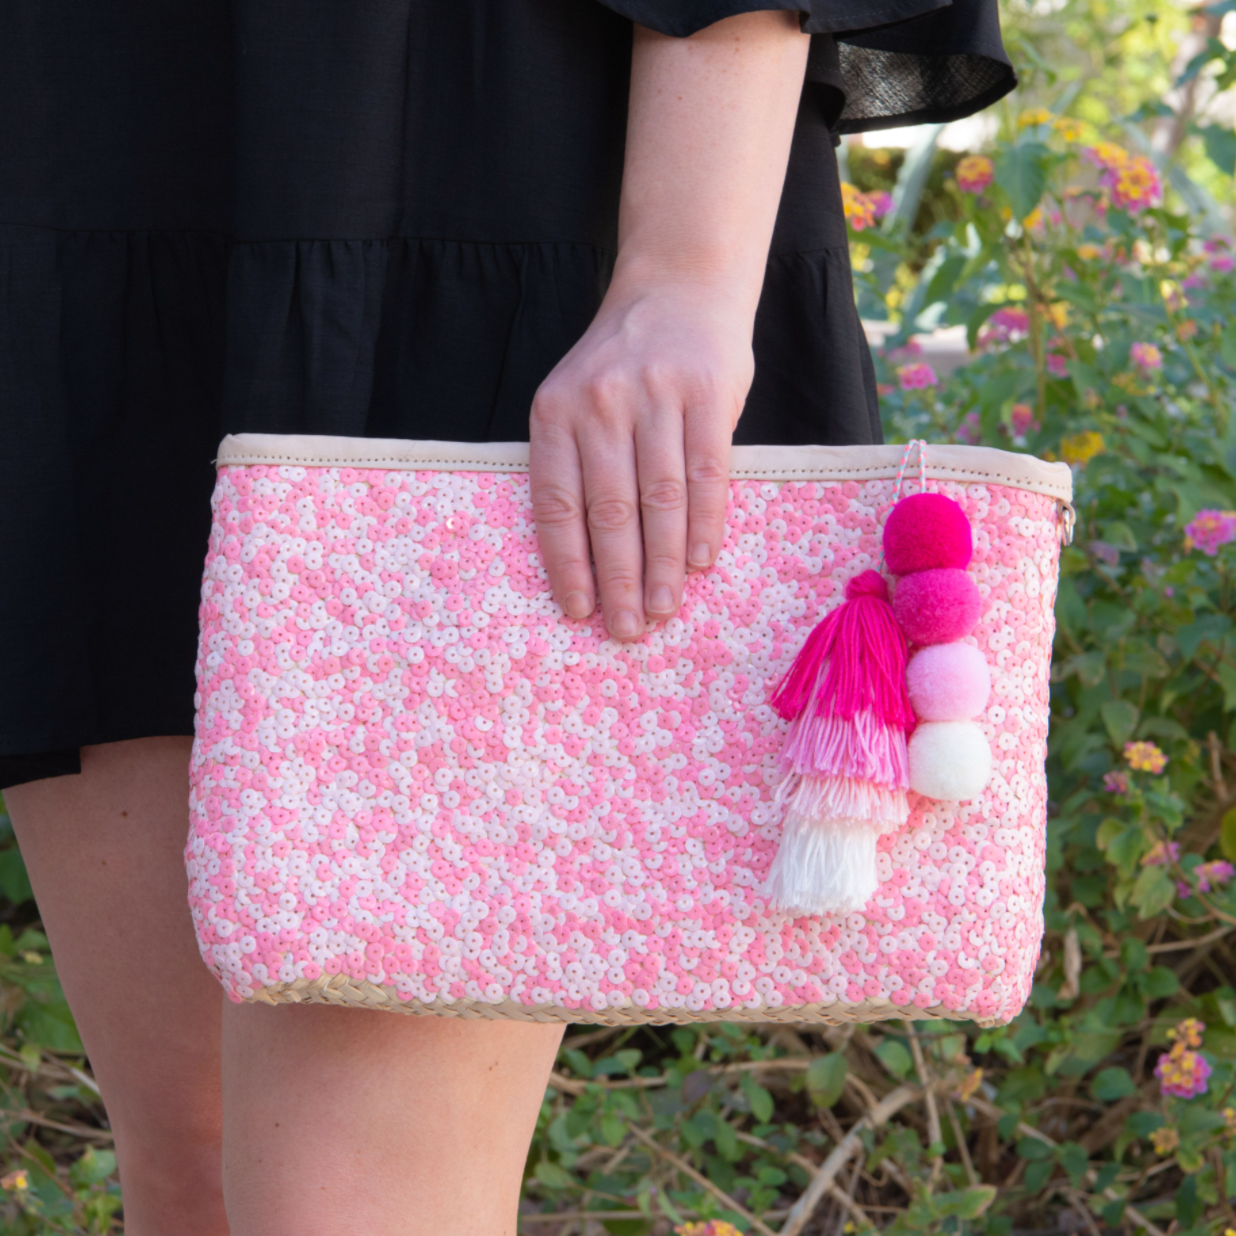 Girl holding straw clutch with pink sequins